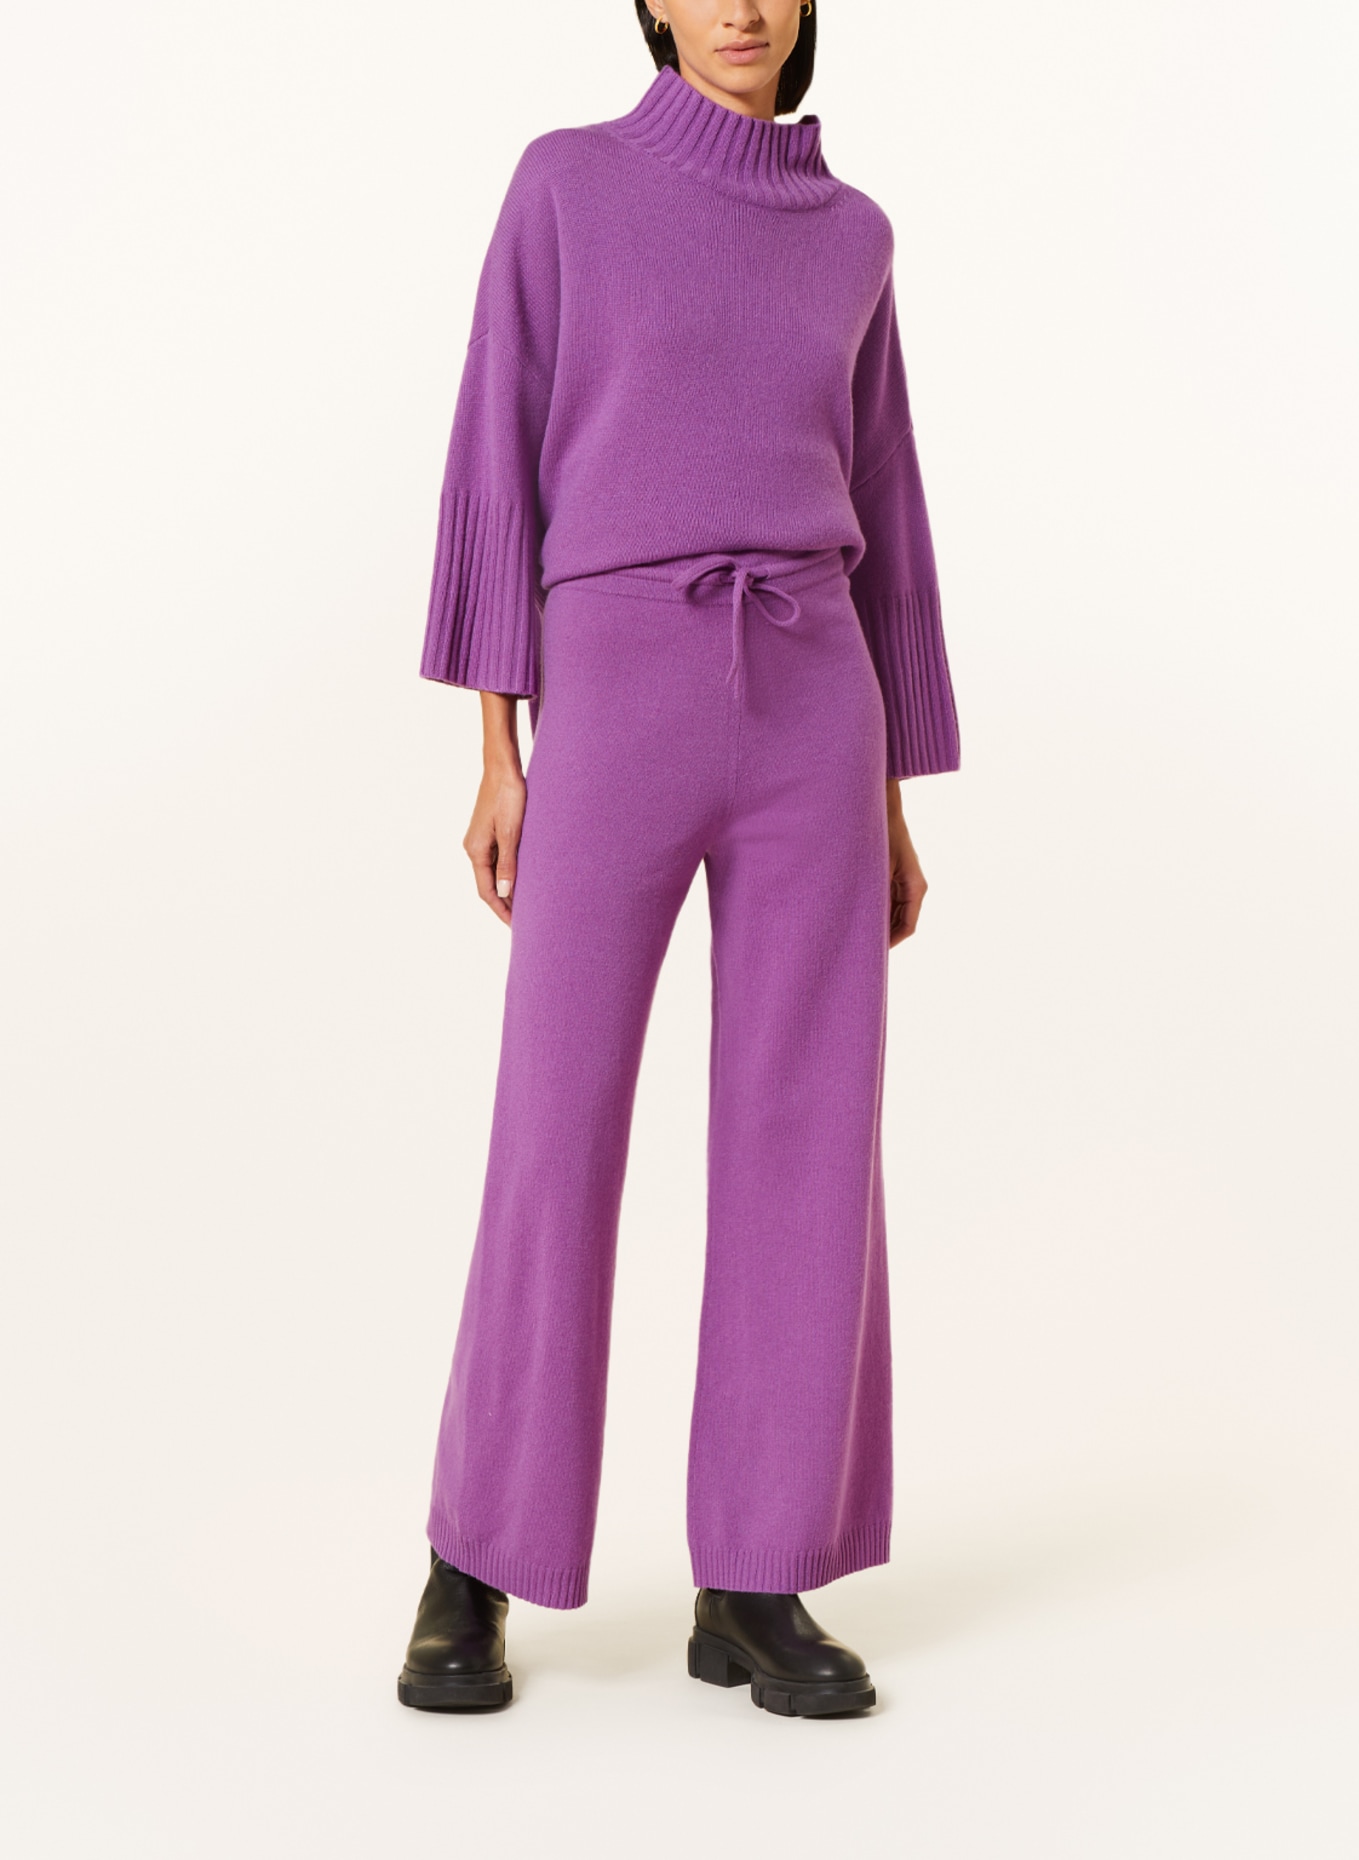 MRS & HUGS Knit trousers made of merino wool, Color: PURPLE (Image 2)